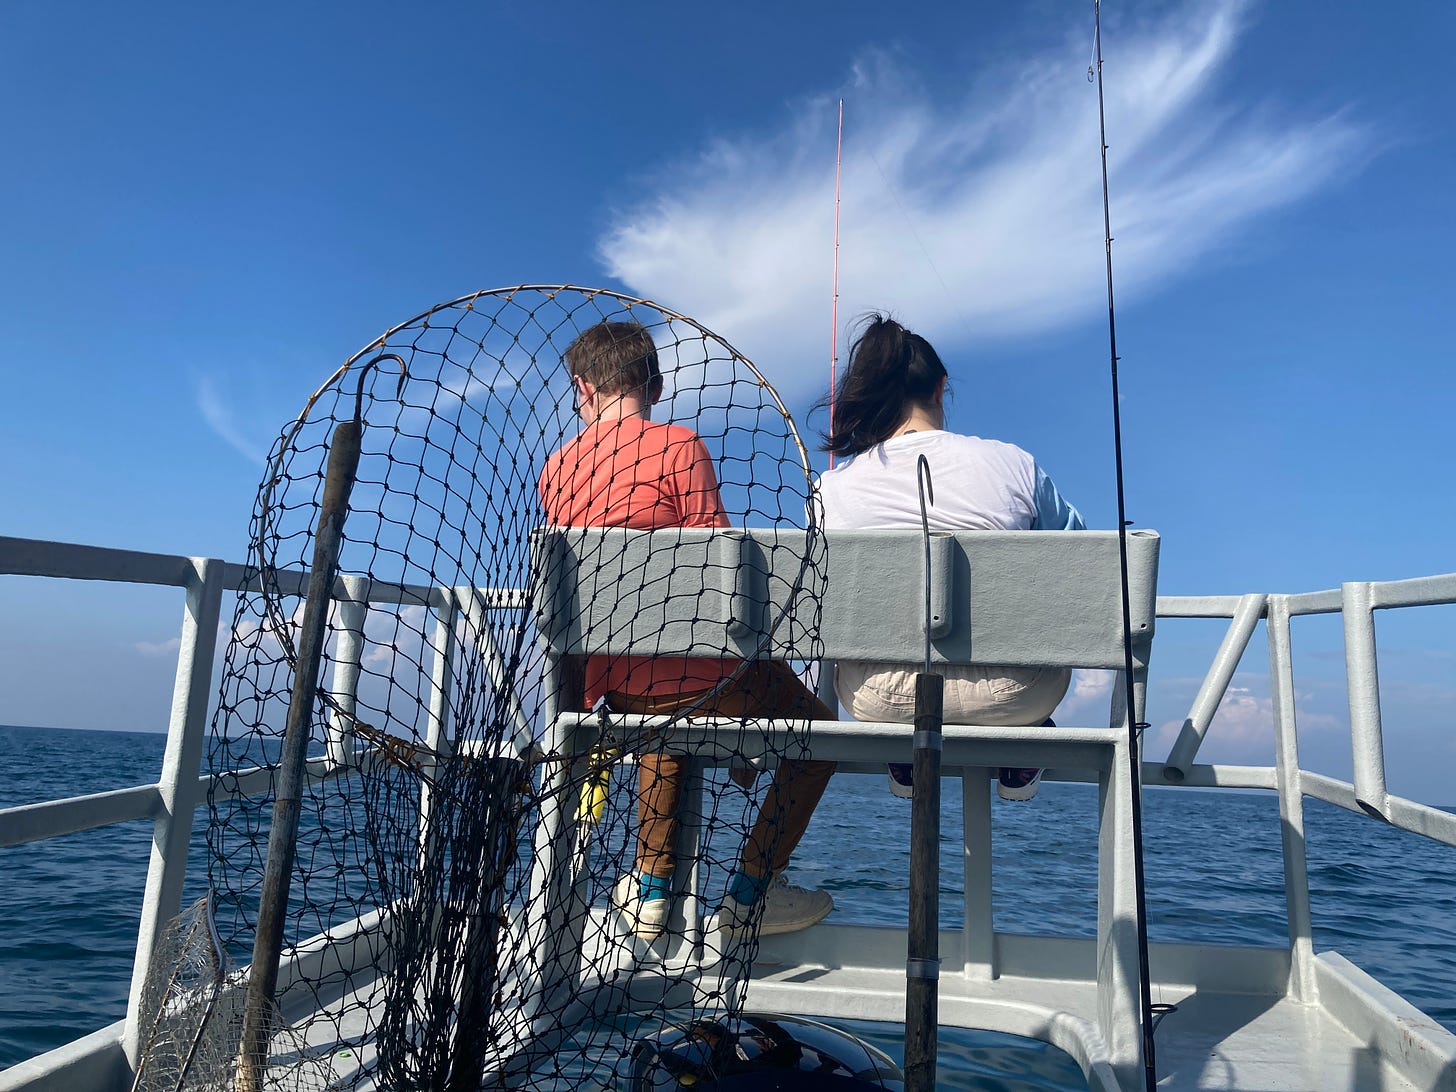 A picture of the back of a boat where two people (a man in an orange shirt and yellow pants, and a young woman with black hair, a white shirt and a pair of shorts) sit facing away from the camera. In the foreground, a large fishing net waits to be used.